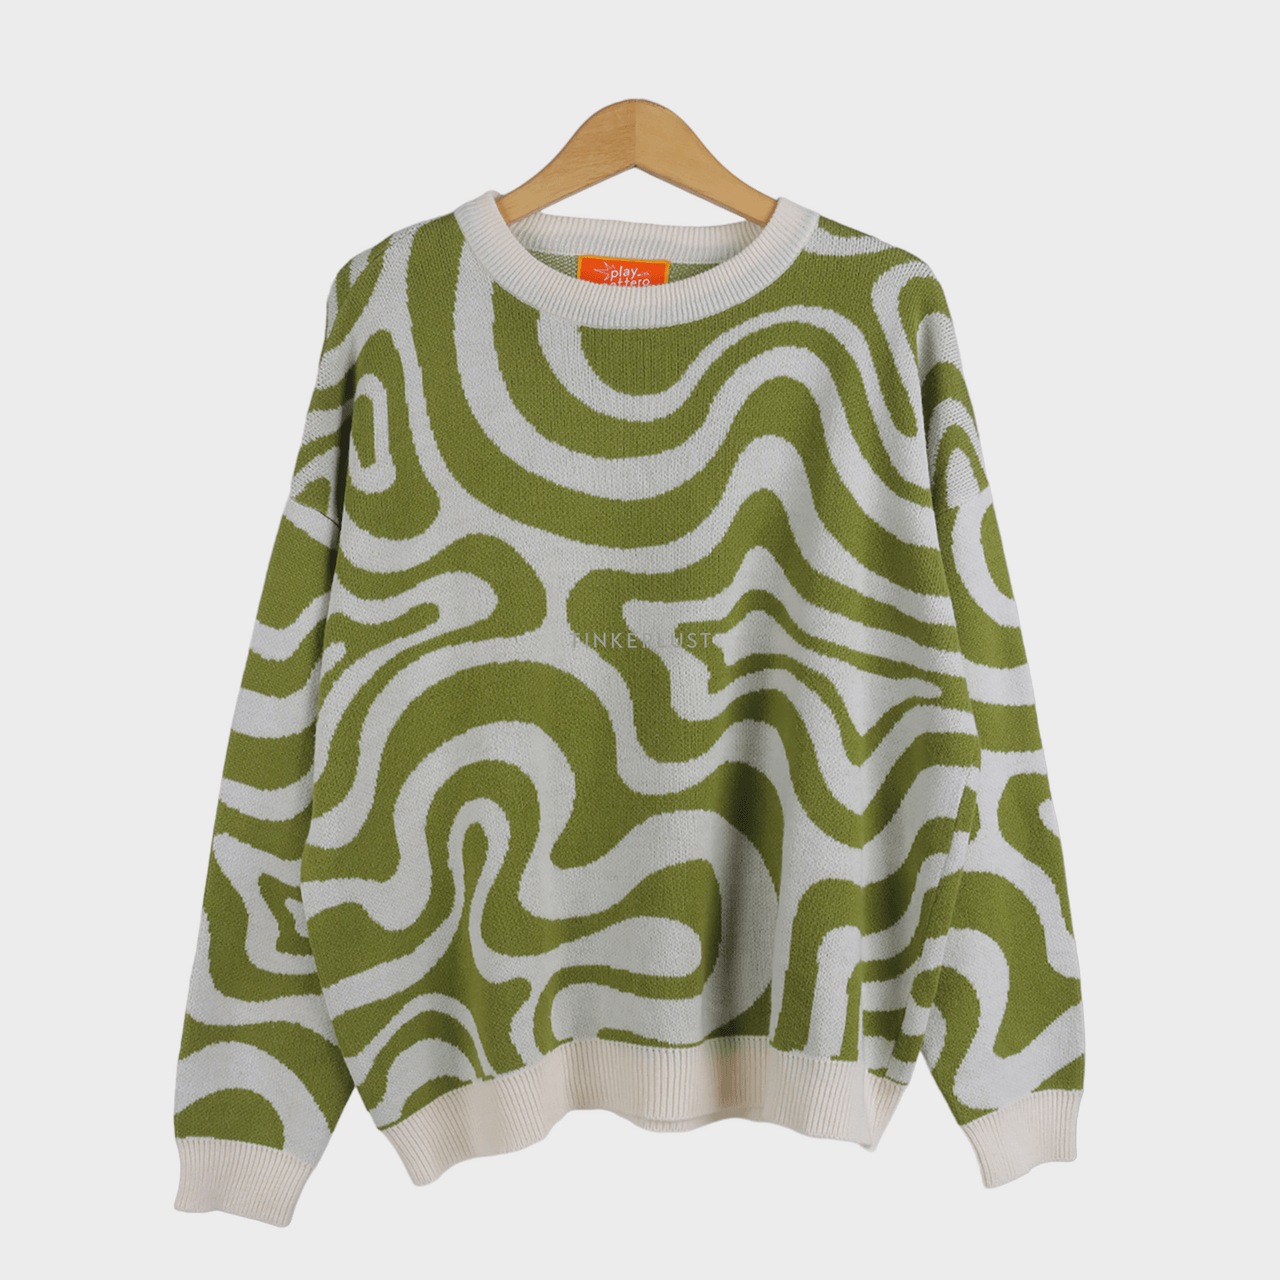 Play With Pattero Green & White Sweater